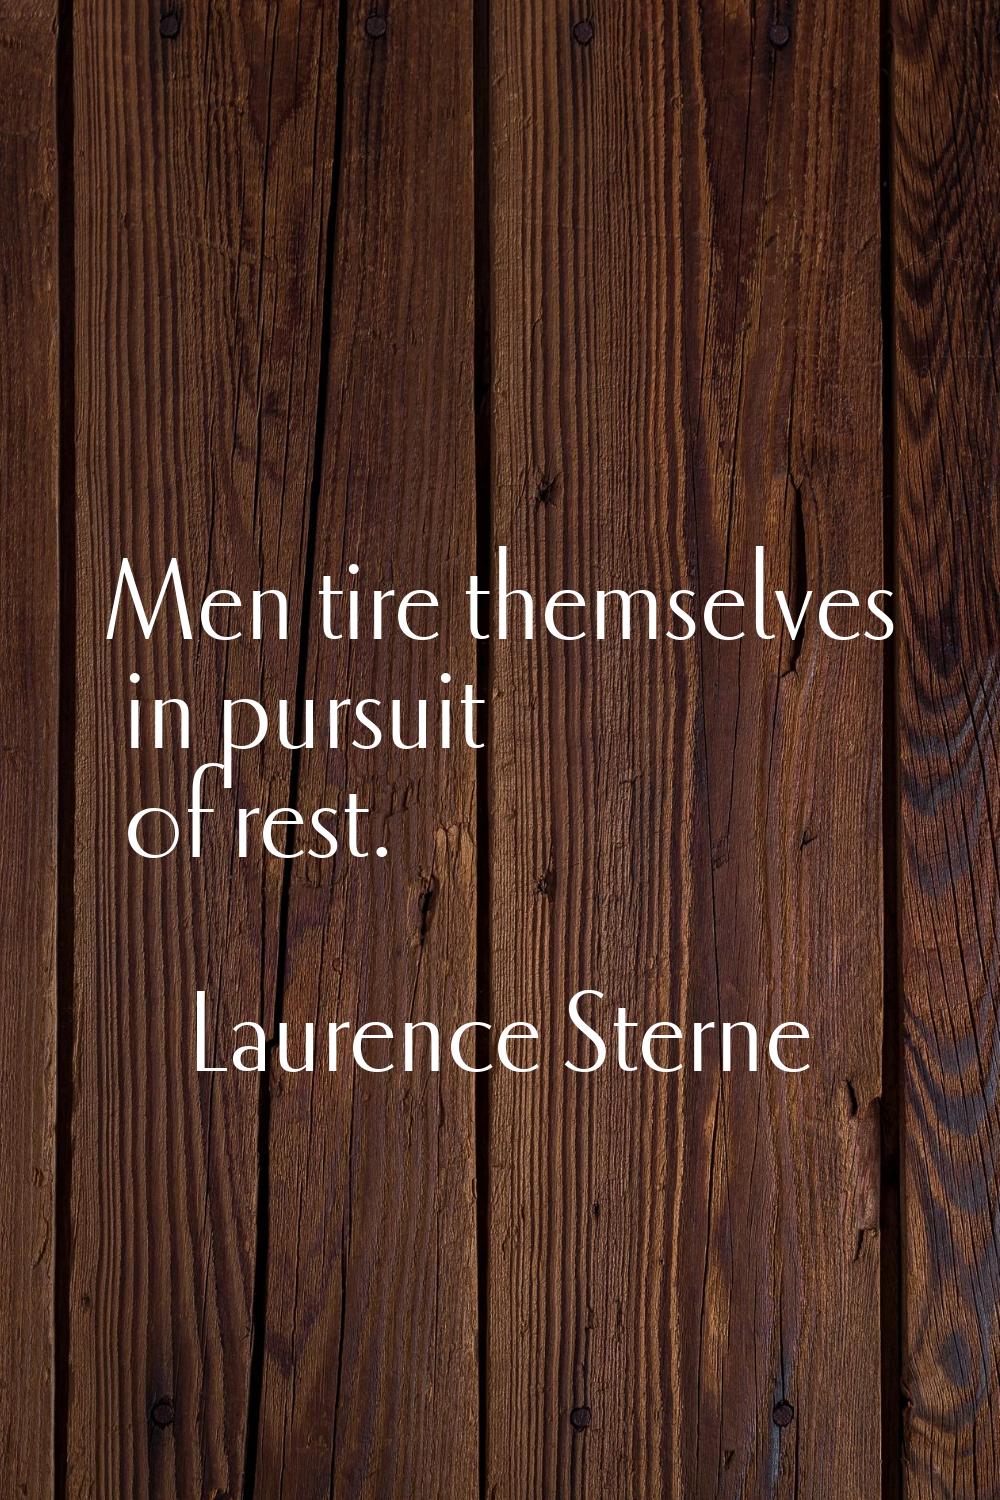 Men tire themselves in pursuit of rest.